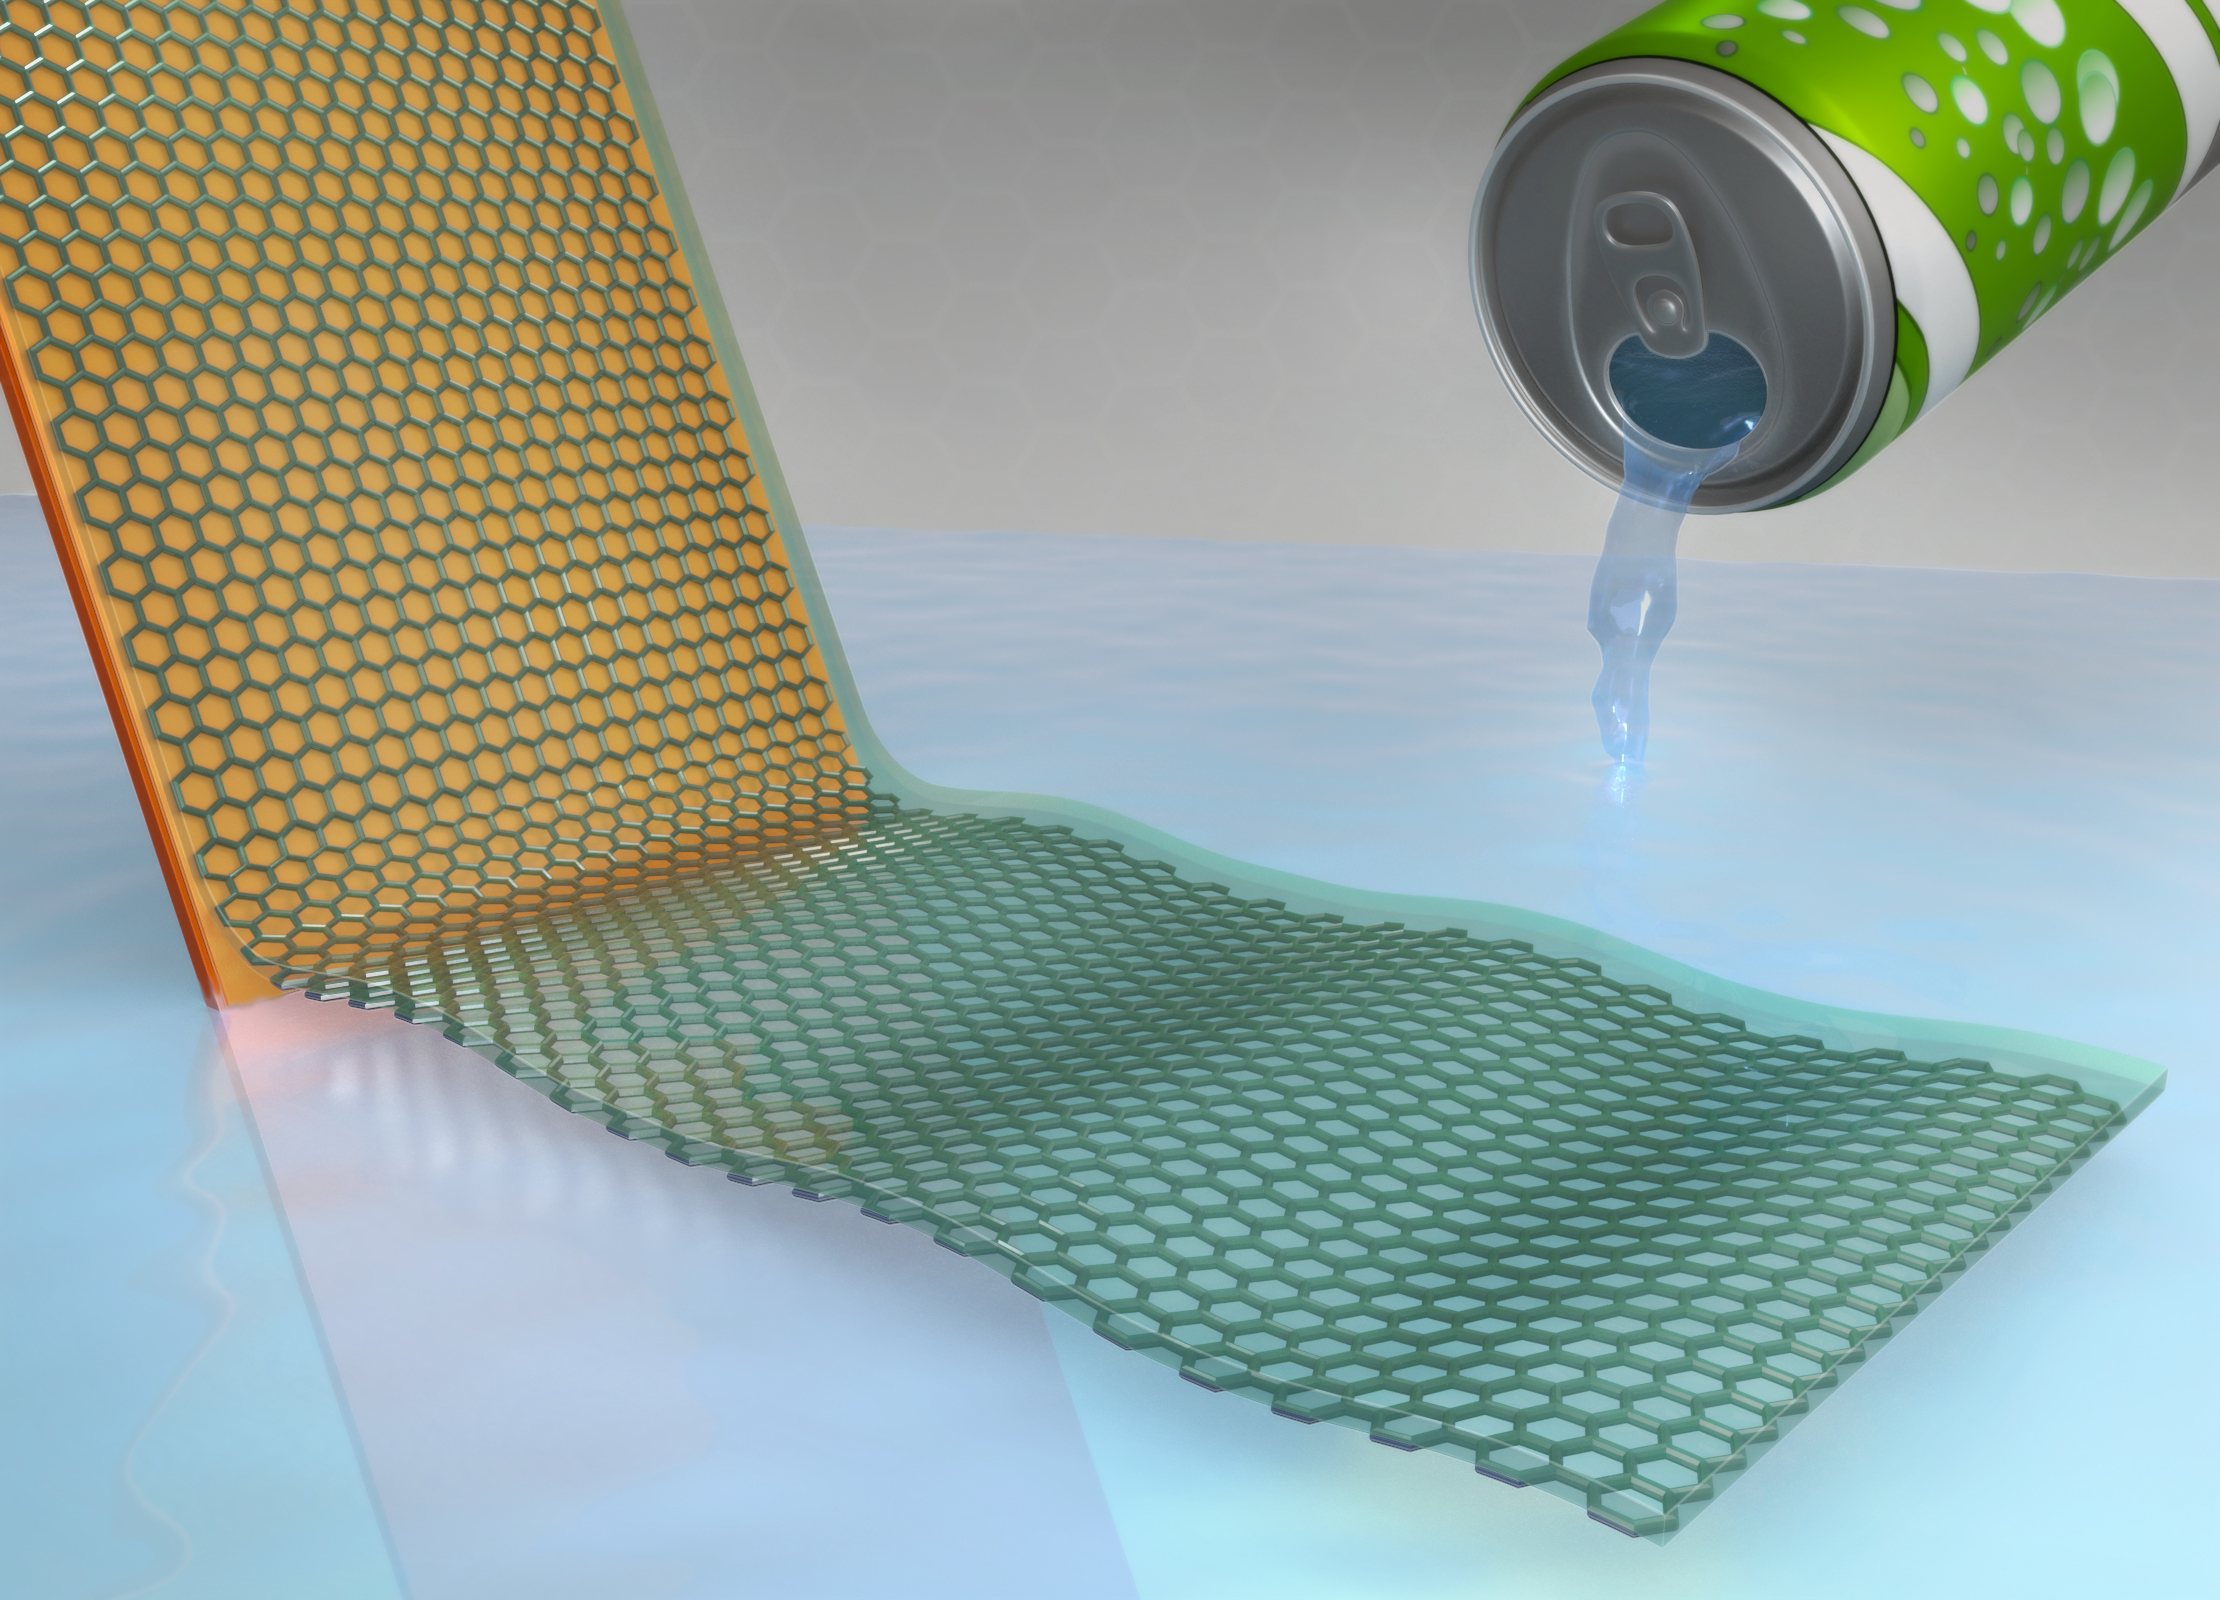 Using only soda water (carbonic acid) as the electrolyte, chemical vapor deposition synthesized graphene is easily transferred via under-etching delamination, allowing for multiple reuse of the metal catalyst substrate.